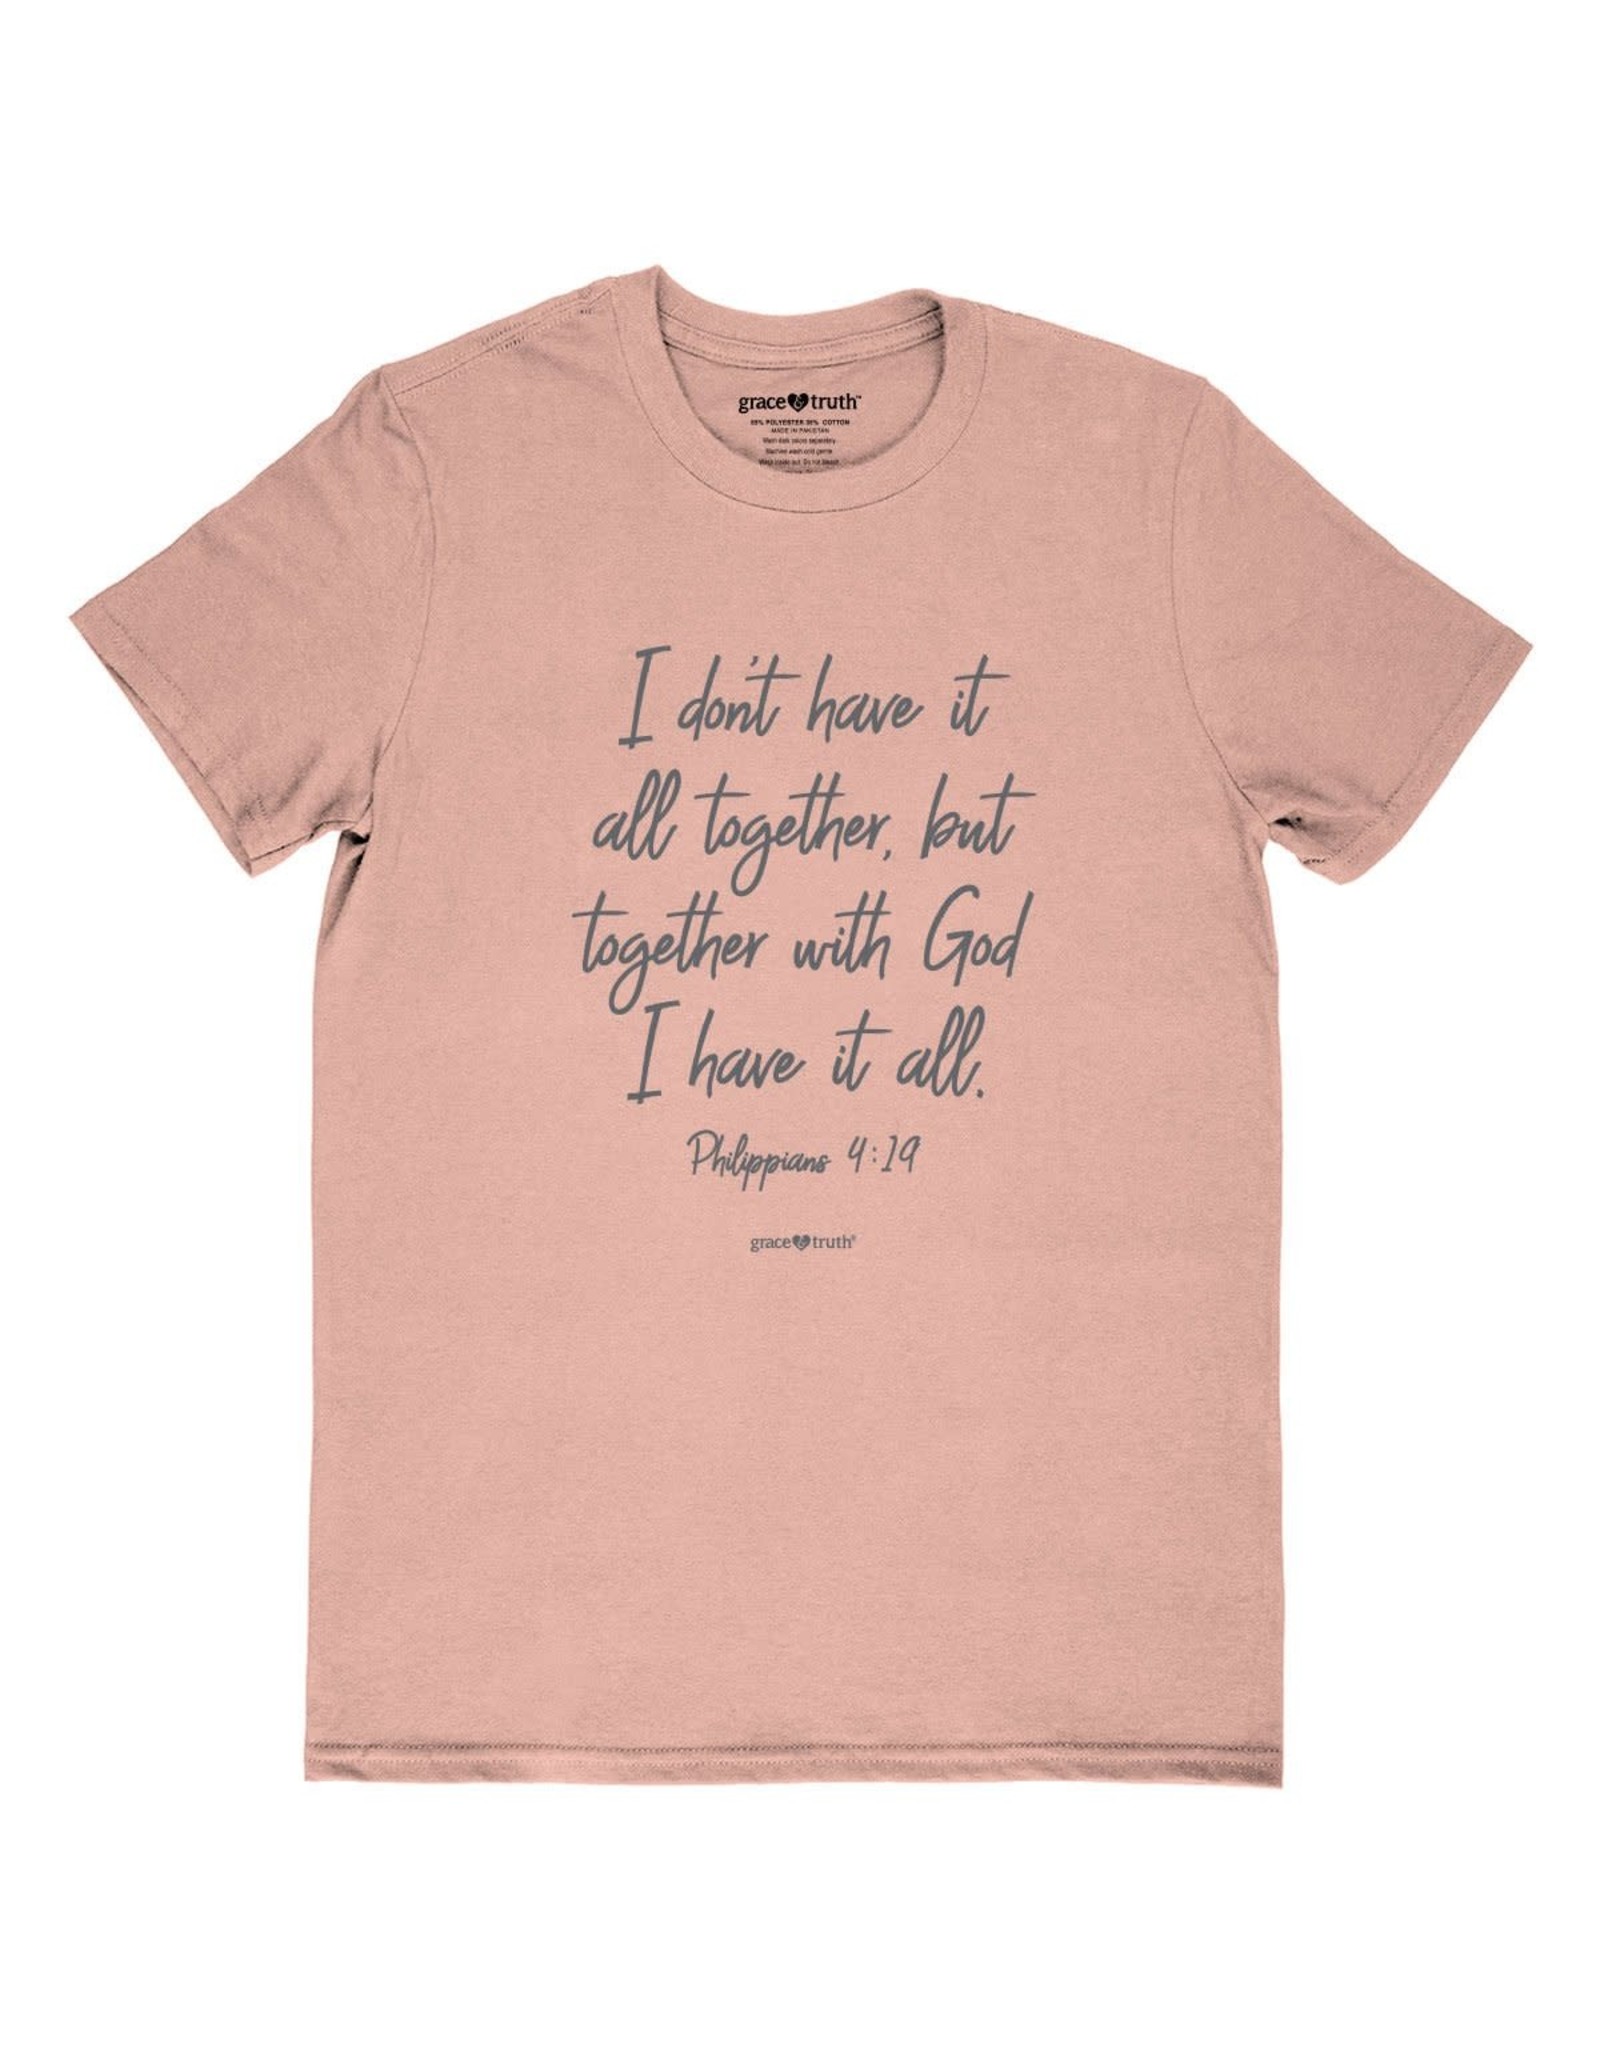 grace & truth grace & truth All Together Philippians 4:19 Christian T-Shirt